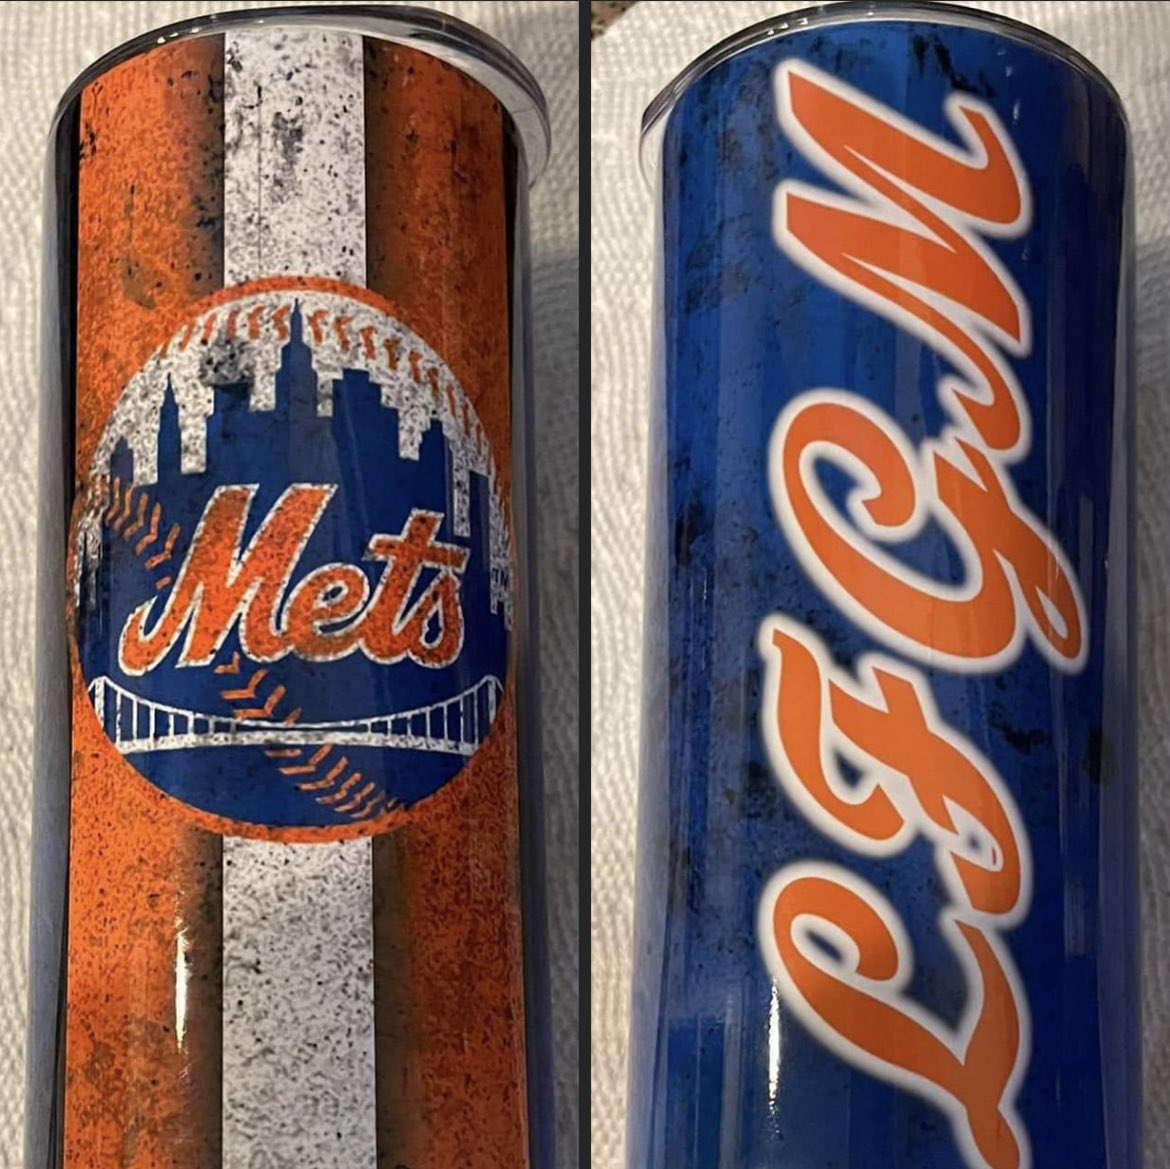 When your friends send you cool things. #LFGM